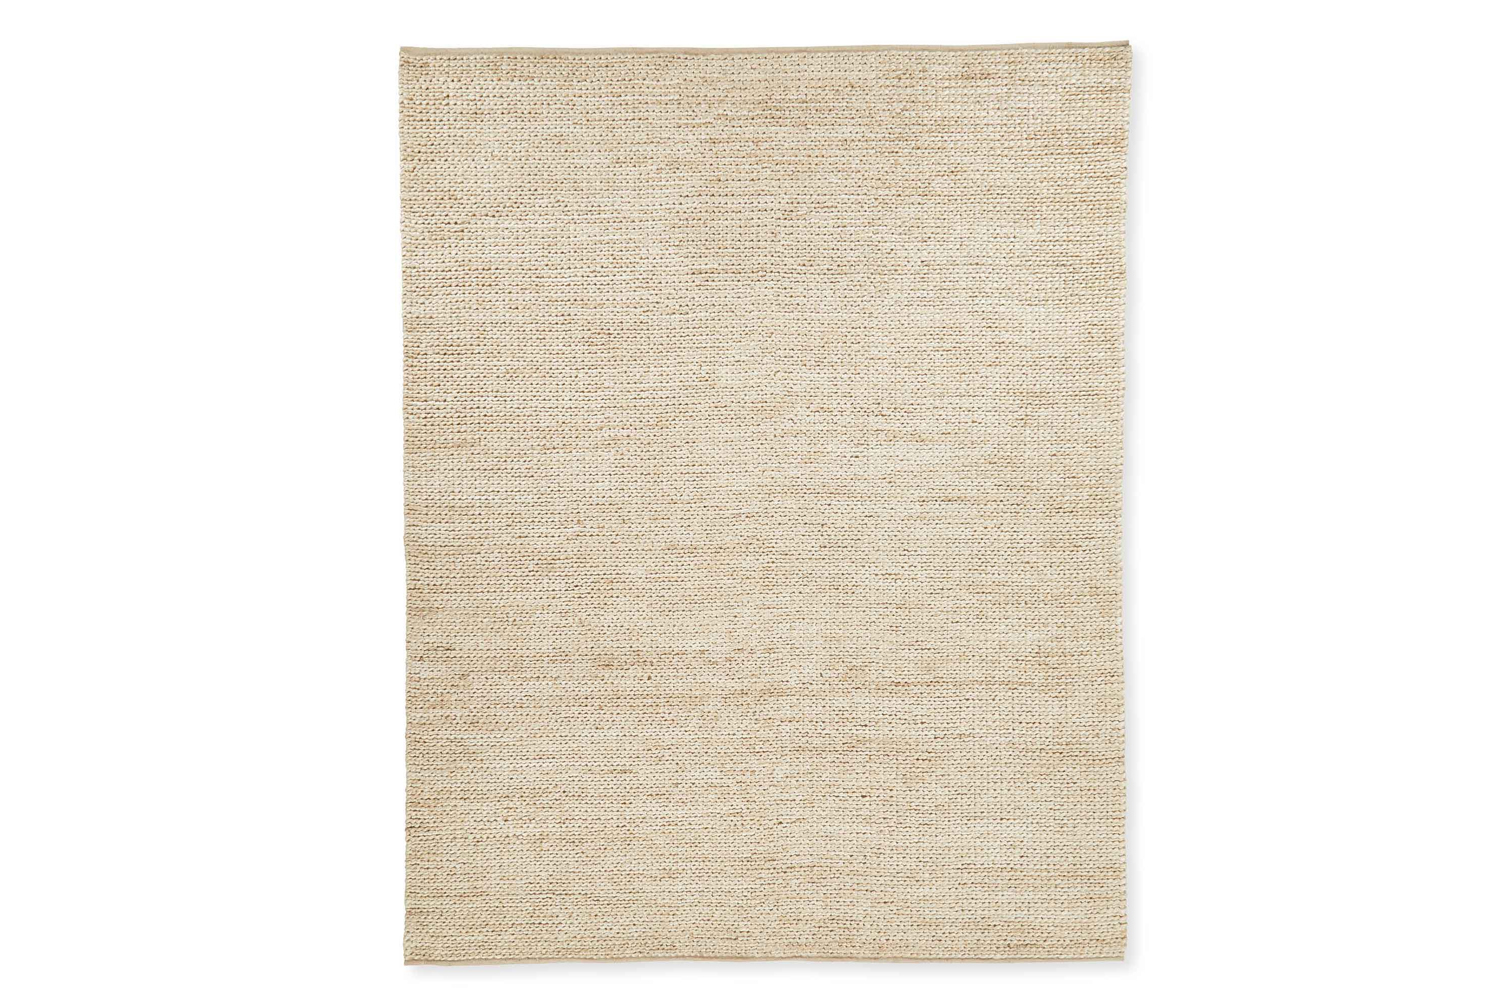 the serena & lily moorea rug is \$768 for the 6 by 9 foot size. 15